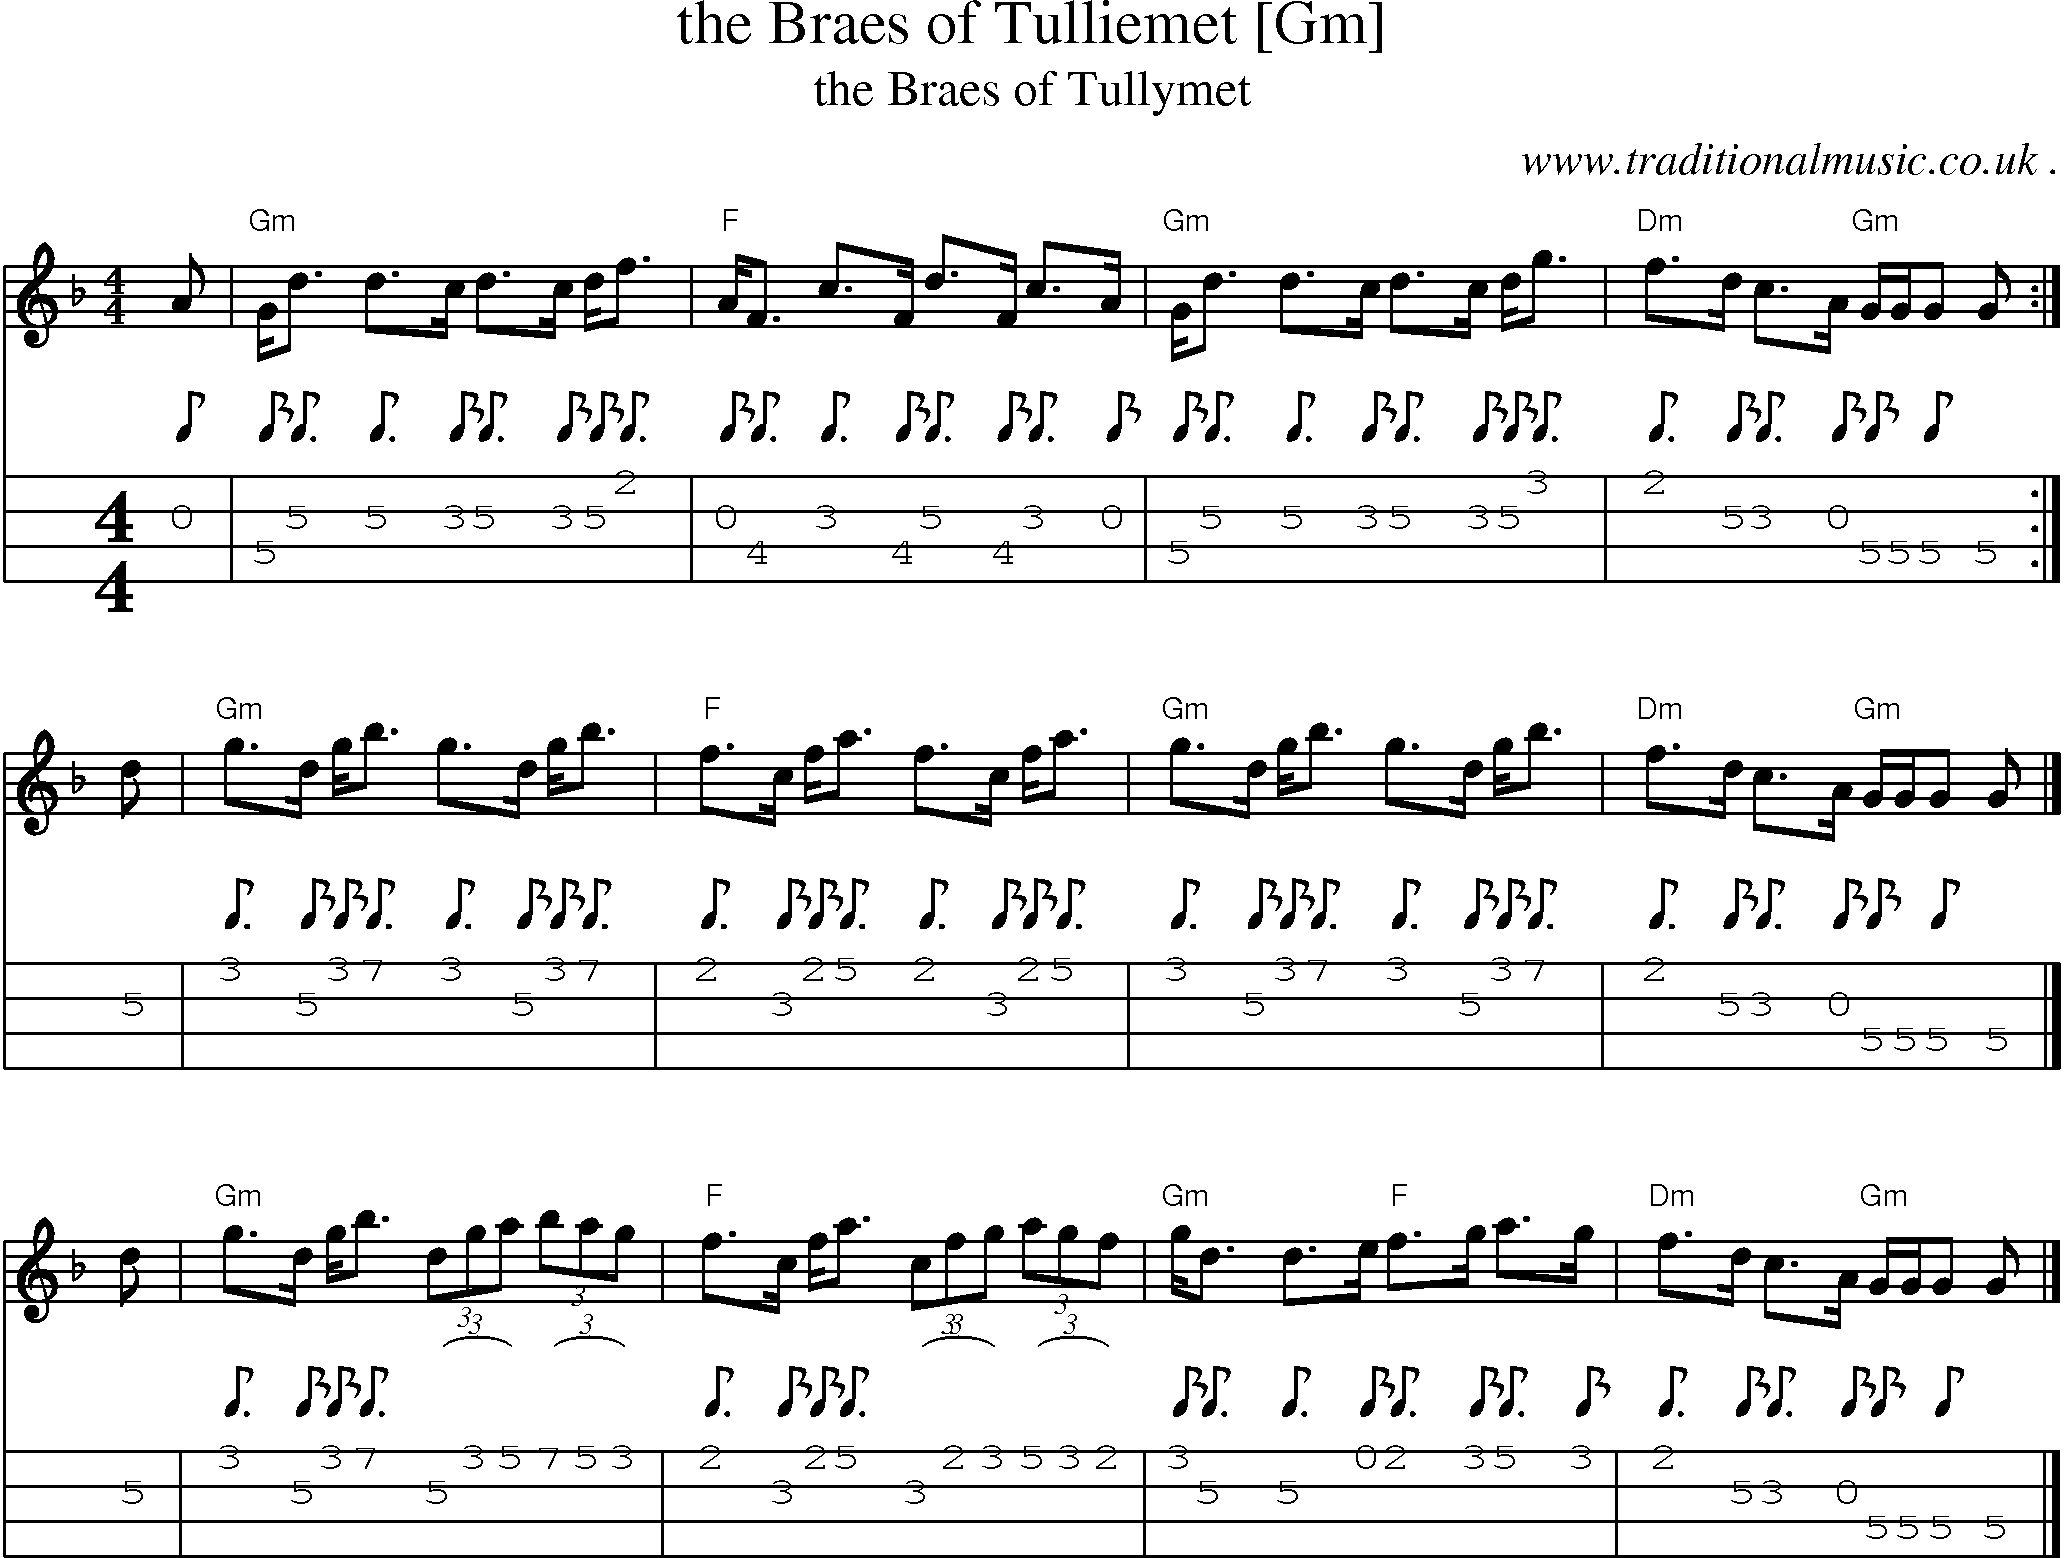 Sheet-music  score, Chords and Mandolin Tabs for The Braes Of Tulliemet [gm]